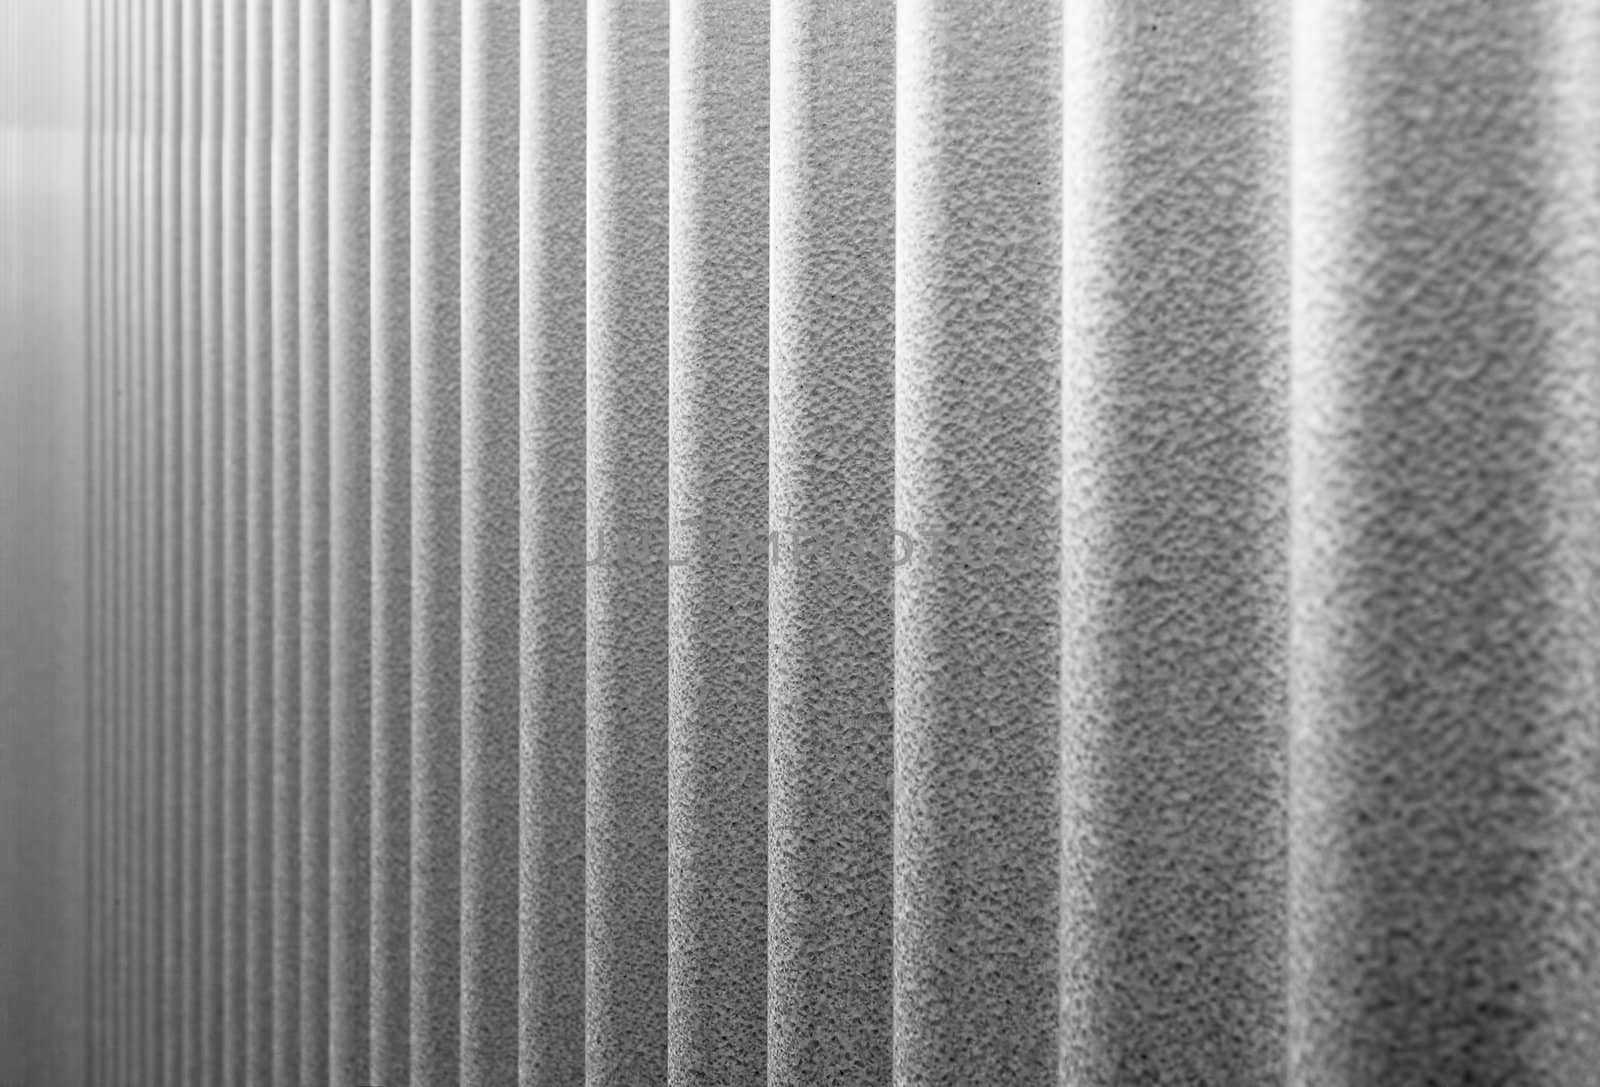 Vulcanized corrugated steel wall that looks like it diminished to infinity